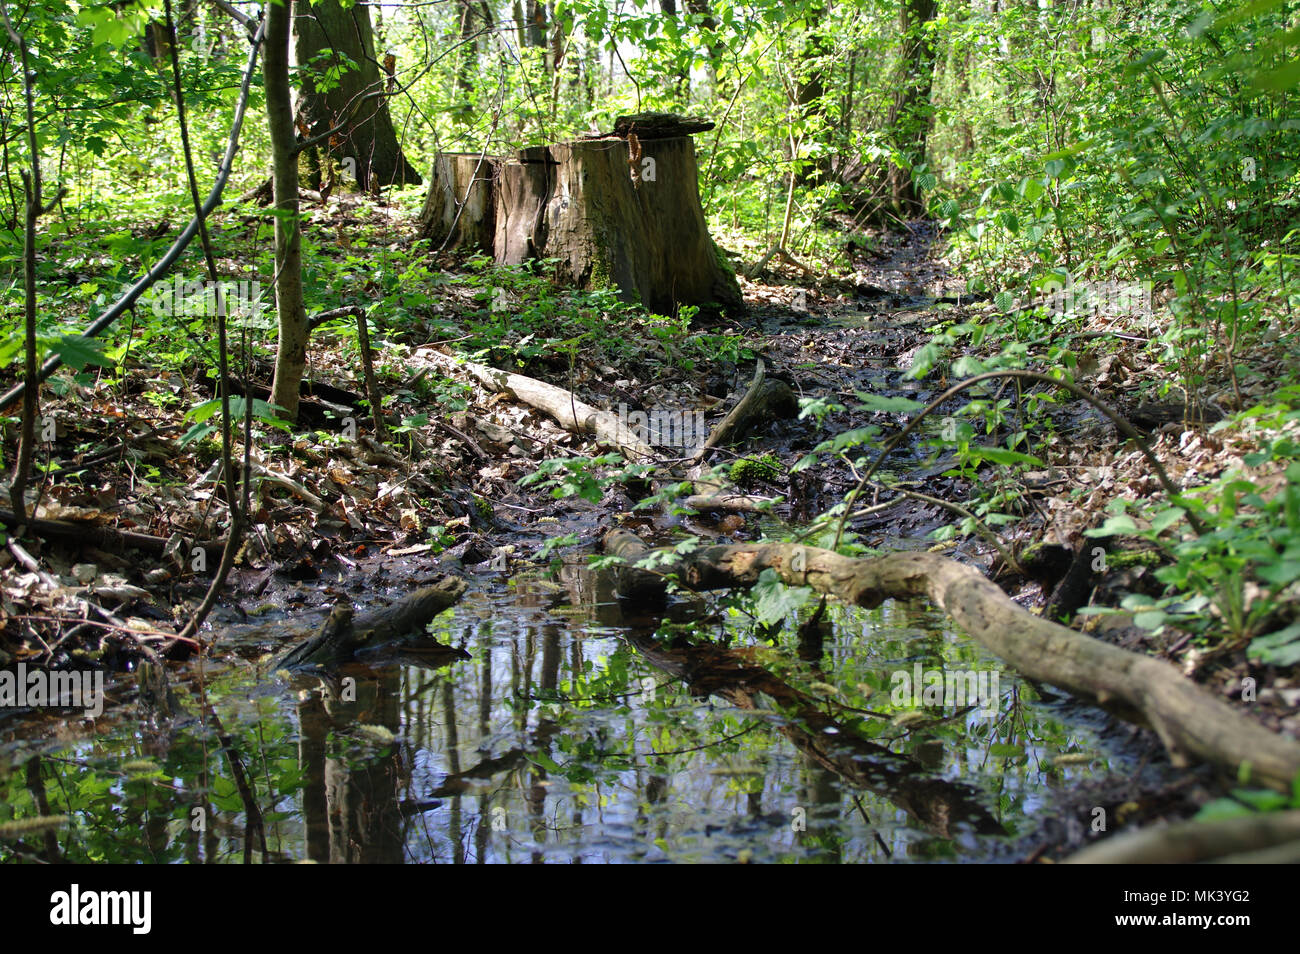 Wetlands. Swampy forest, natural environment and stream between the branches. Natural decay process. Stock Photo